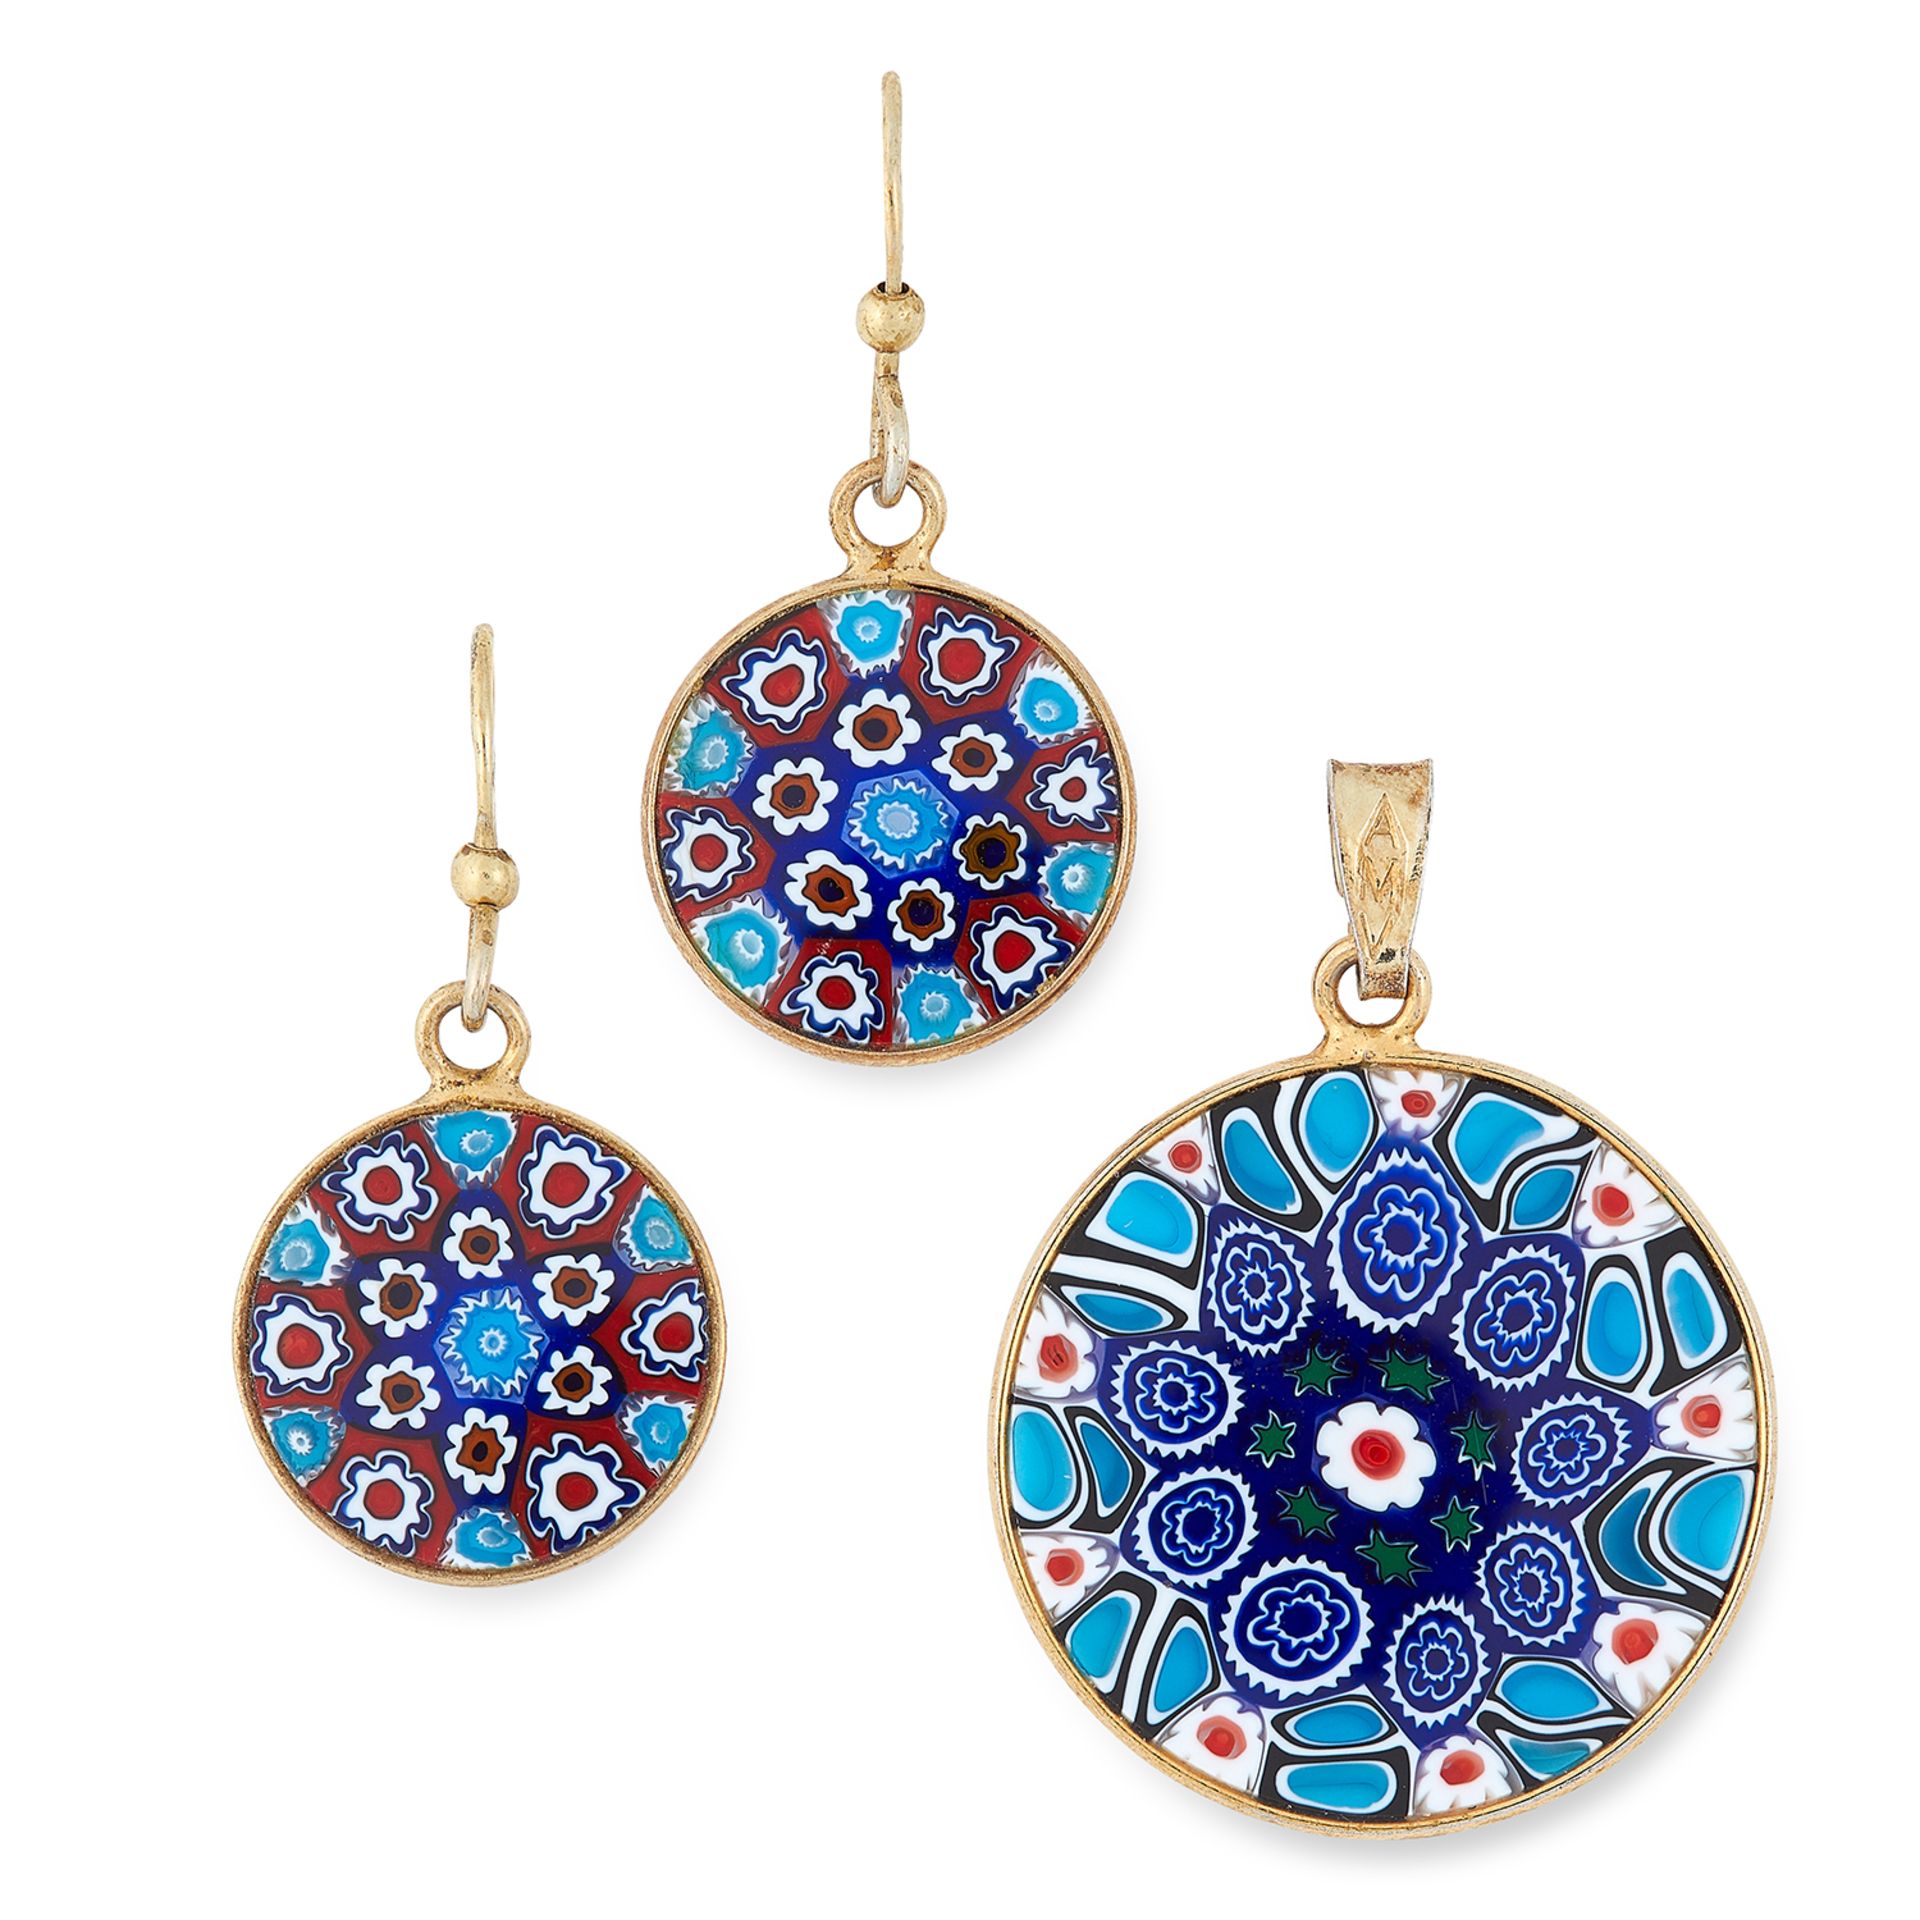 MOSAIC SUITE comprising of an enamelled pair of earrings and a pendant in floral design, total